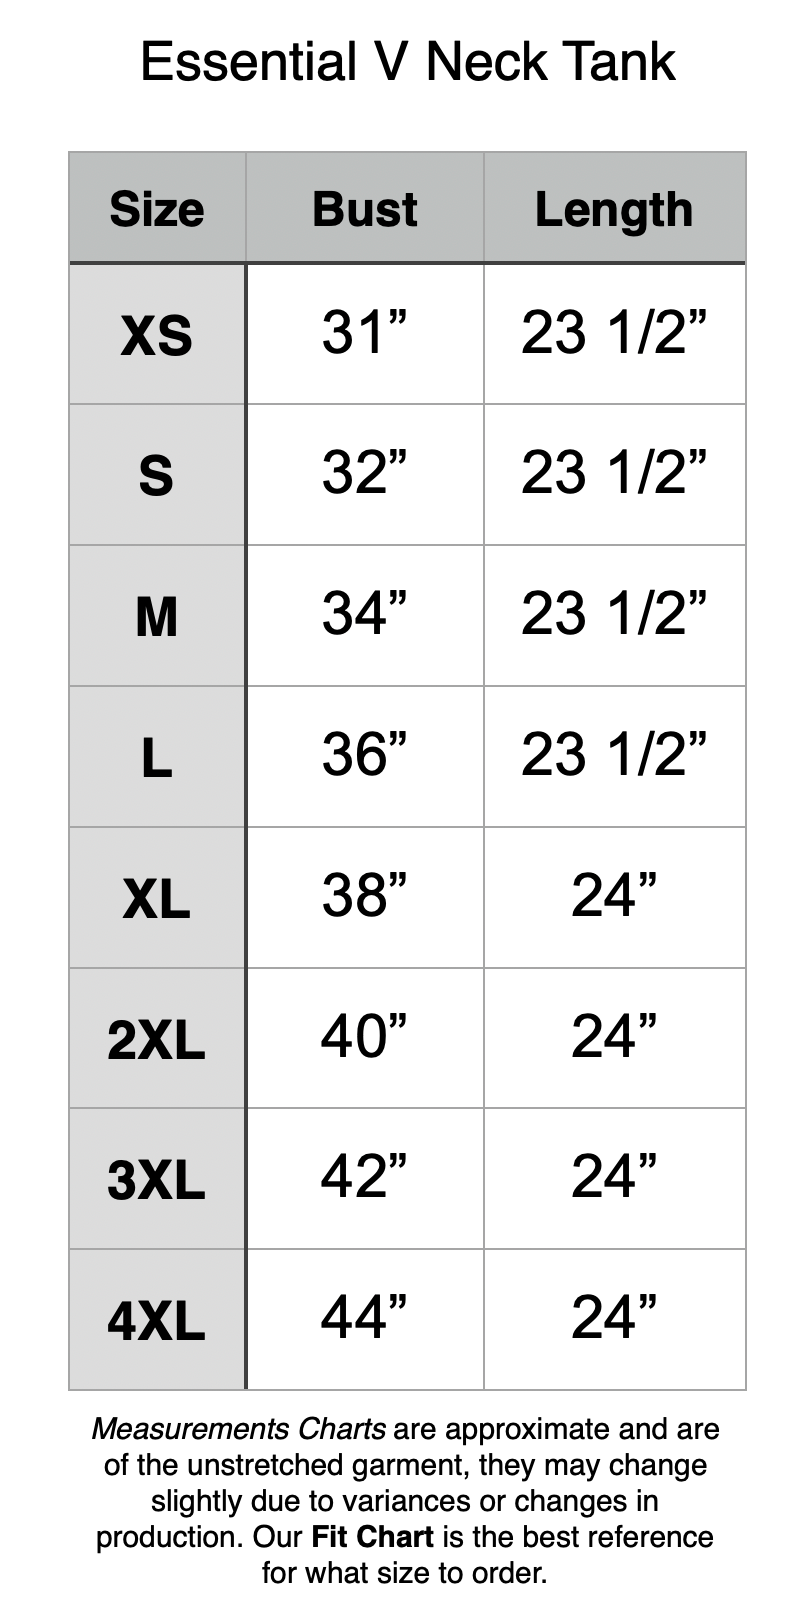 Essential V Neck Tank: XS: 31” Bust, 23.5” Length. S: 32” Bust, 23.5” Length. M: 34” Bust, 23.5” Length. L: 36” Bust, 23.5” Length. XL: 38” Bust, 24” Length. 2XL: 40” Bust, 24” Length. 3XL: 42” Bust, 24” Length. 4XL: 44” Bust, 24” Length.